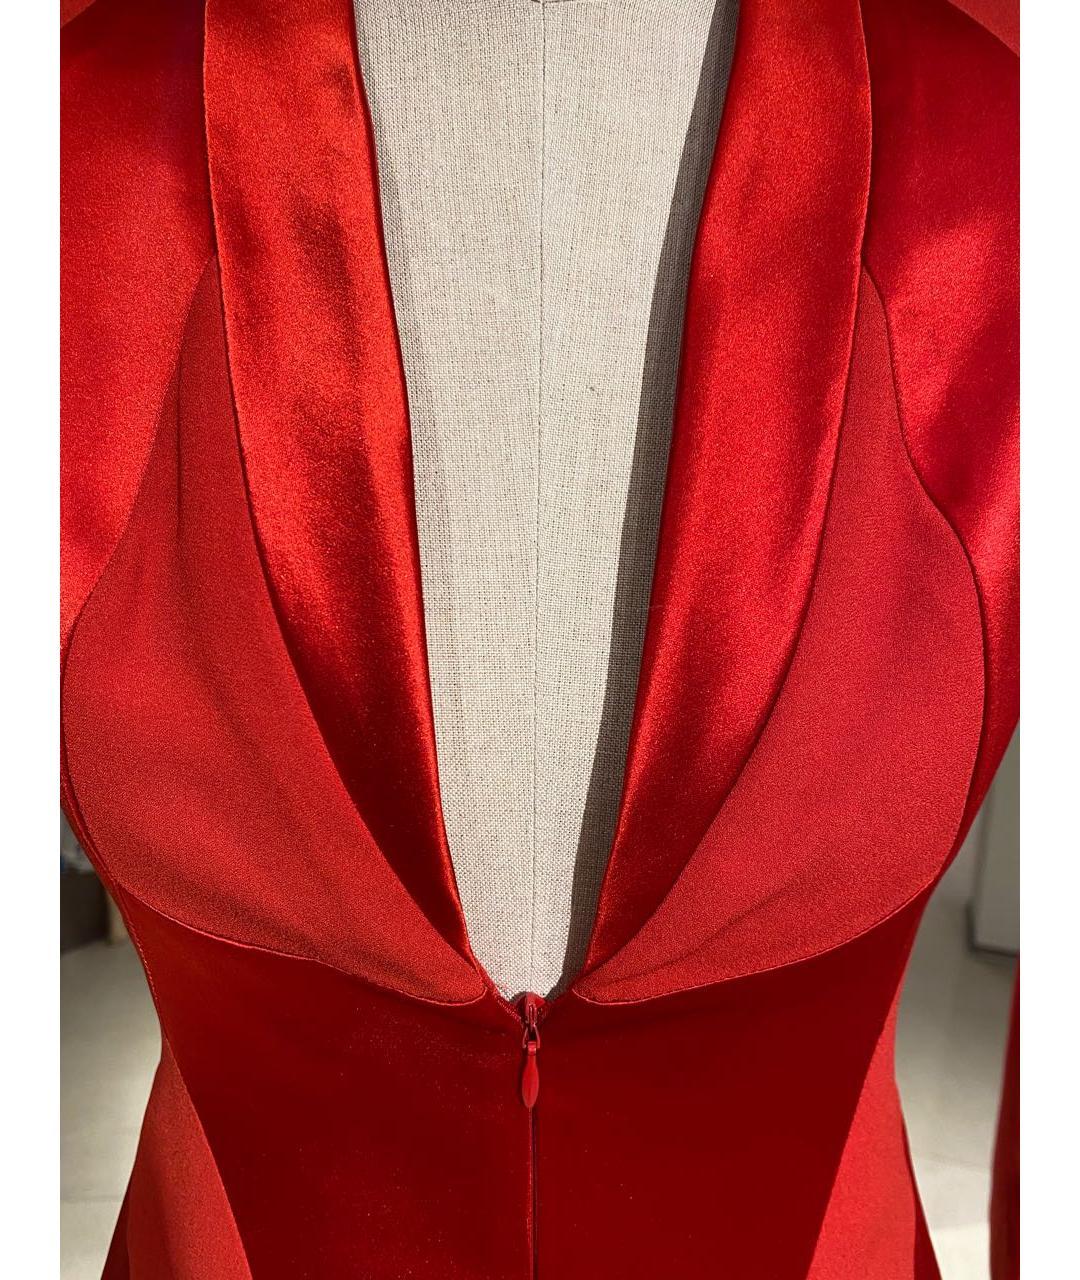 2009 Alexander McQueen Cocktail Dress
Color: Red
Silk Blend
Size: IT - 38
Fully lined
Made in Italy
Excellent condition